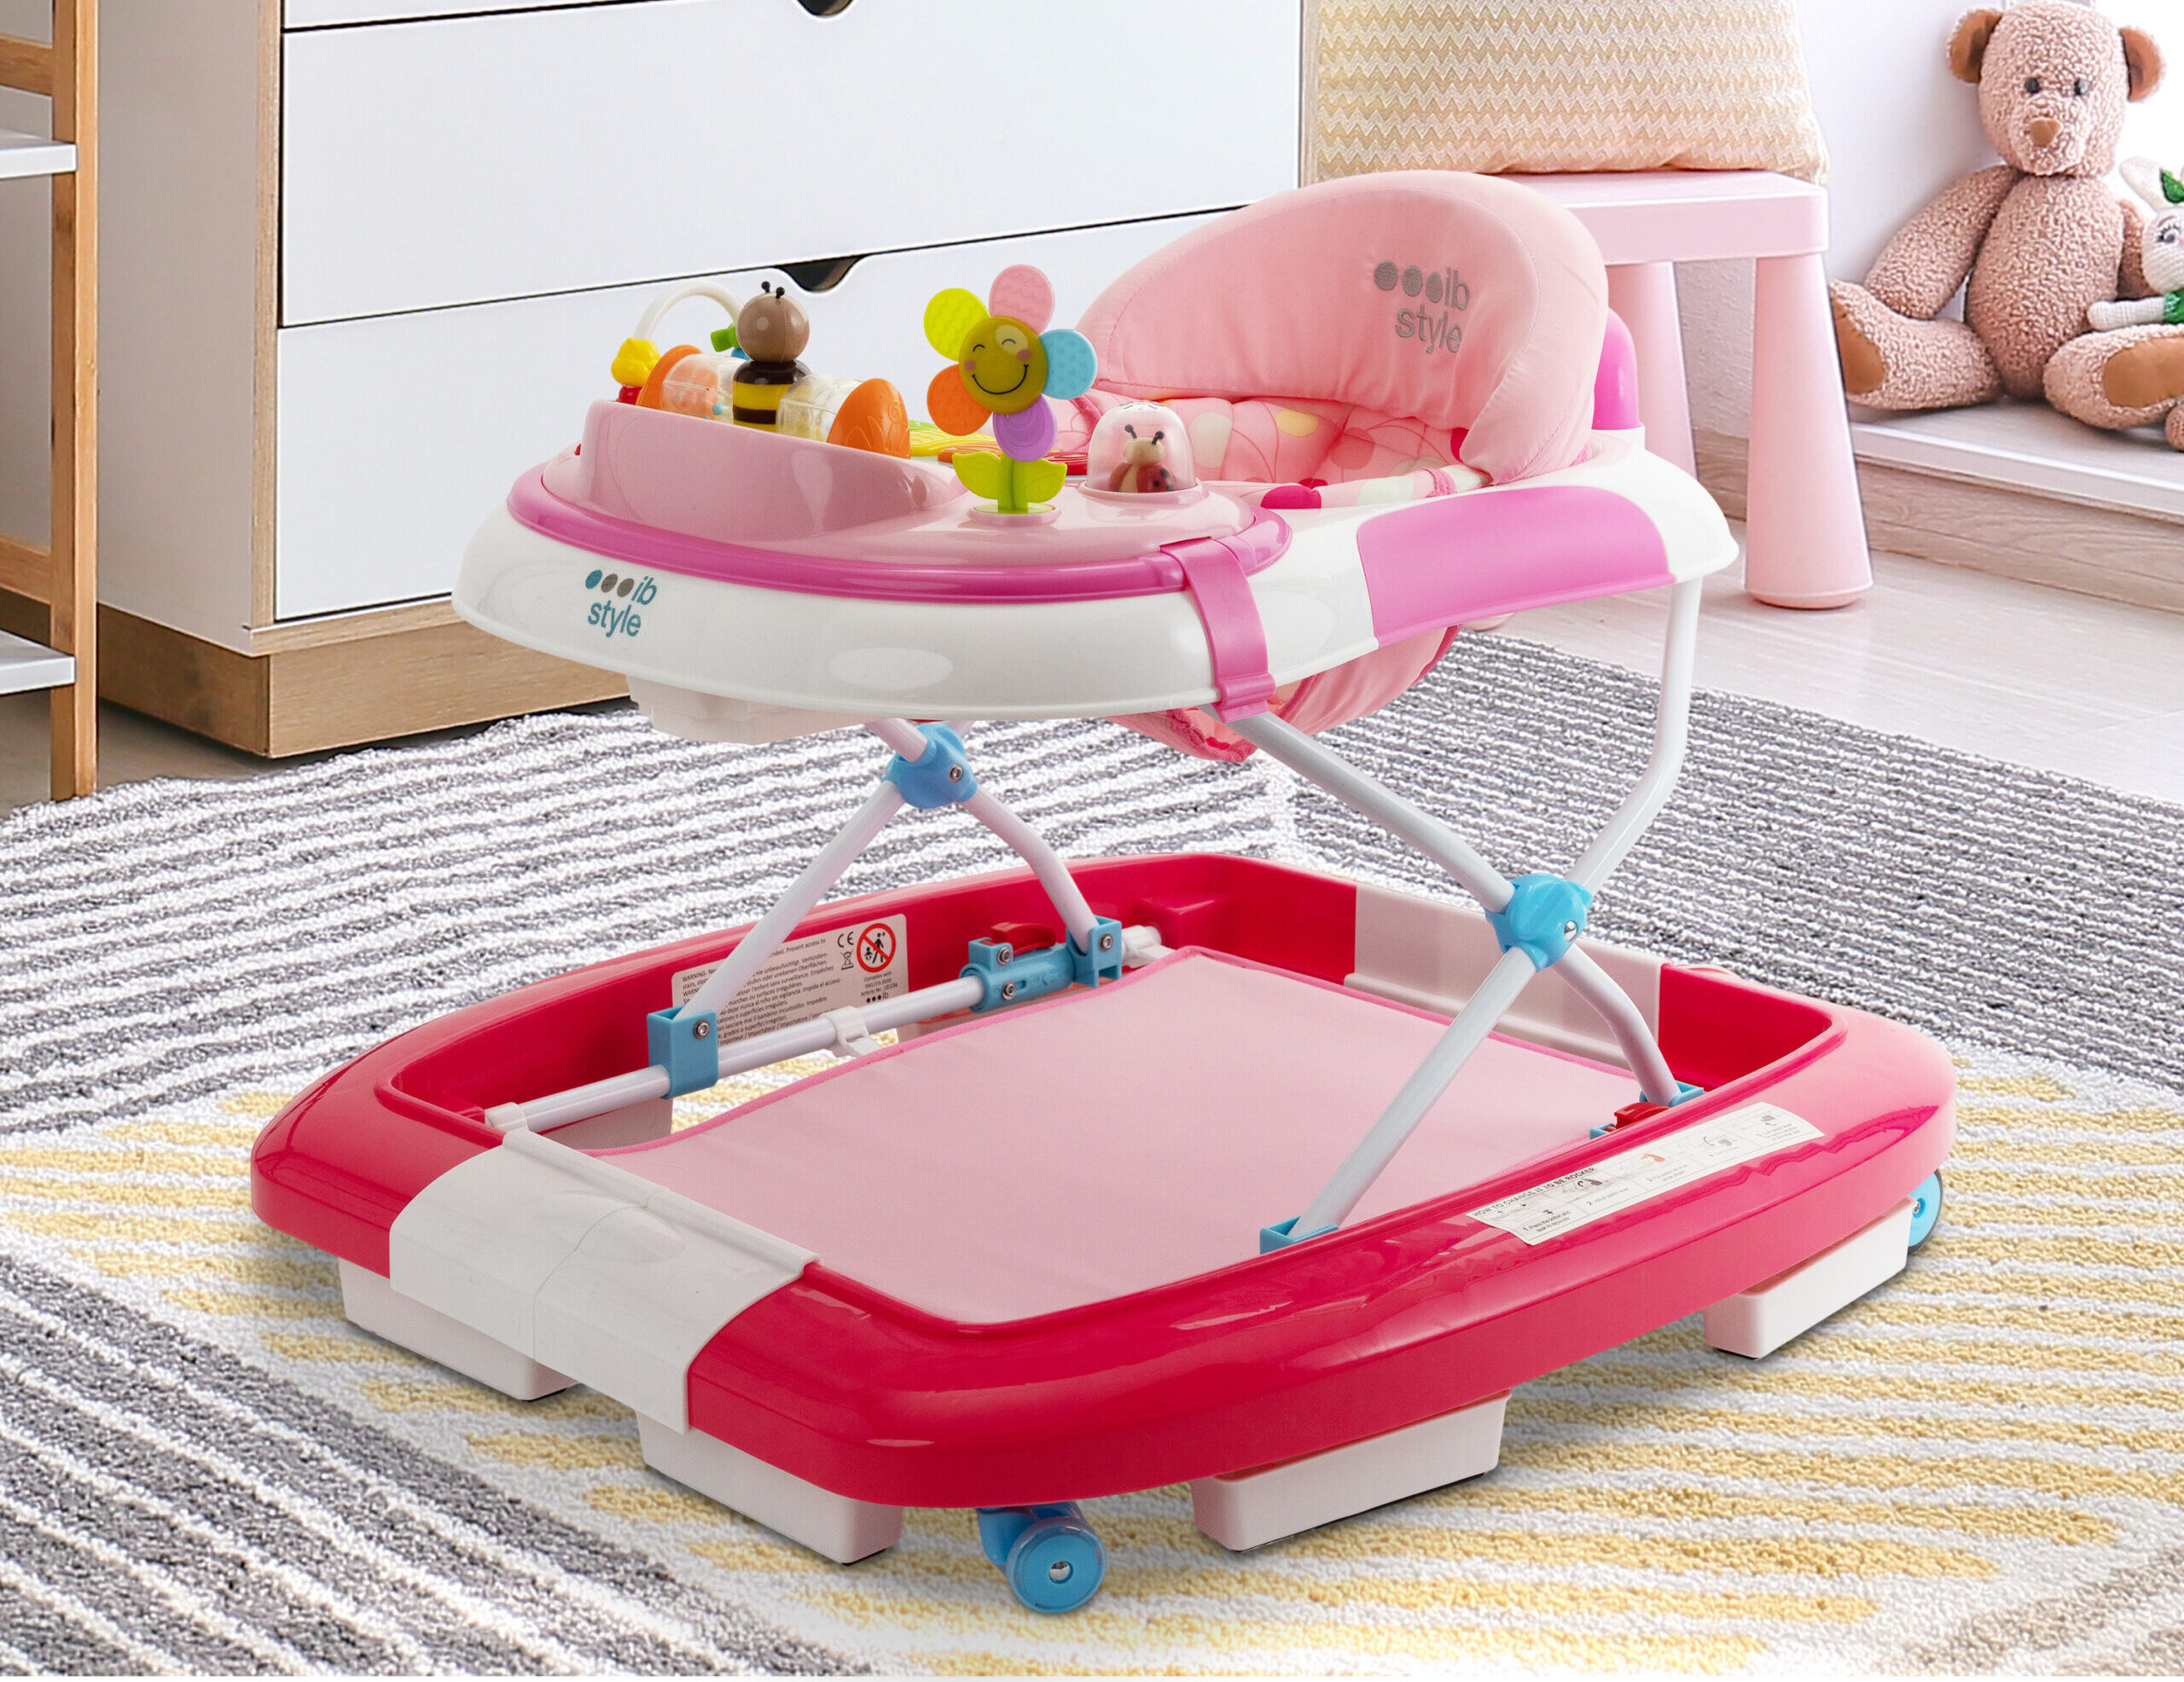 Useful Entertainment for your child; Provide a Safe and Secure Way to Keep an Eye on baby while Busy (Ib Style, Baby Walker)